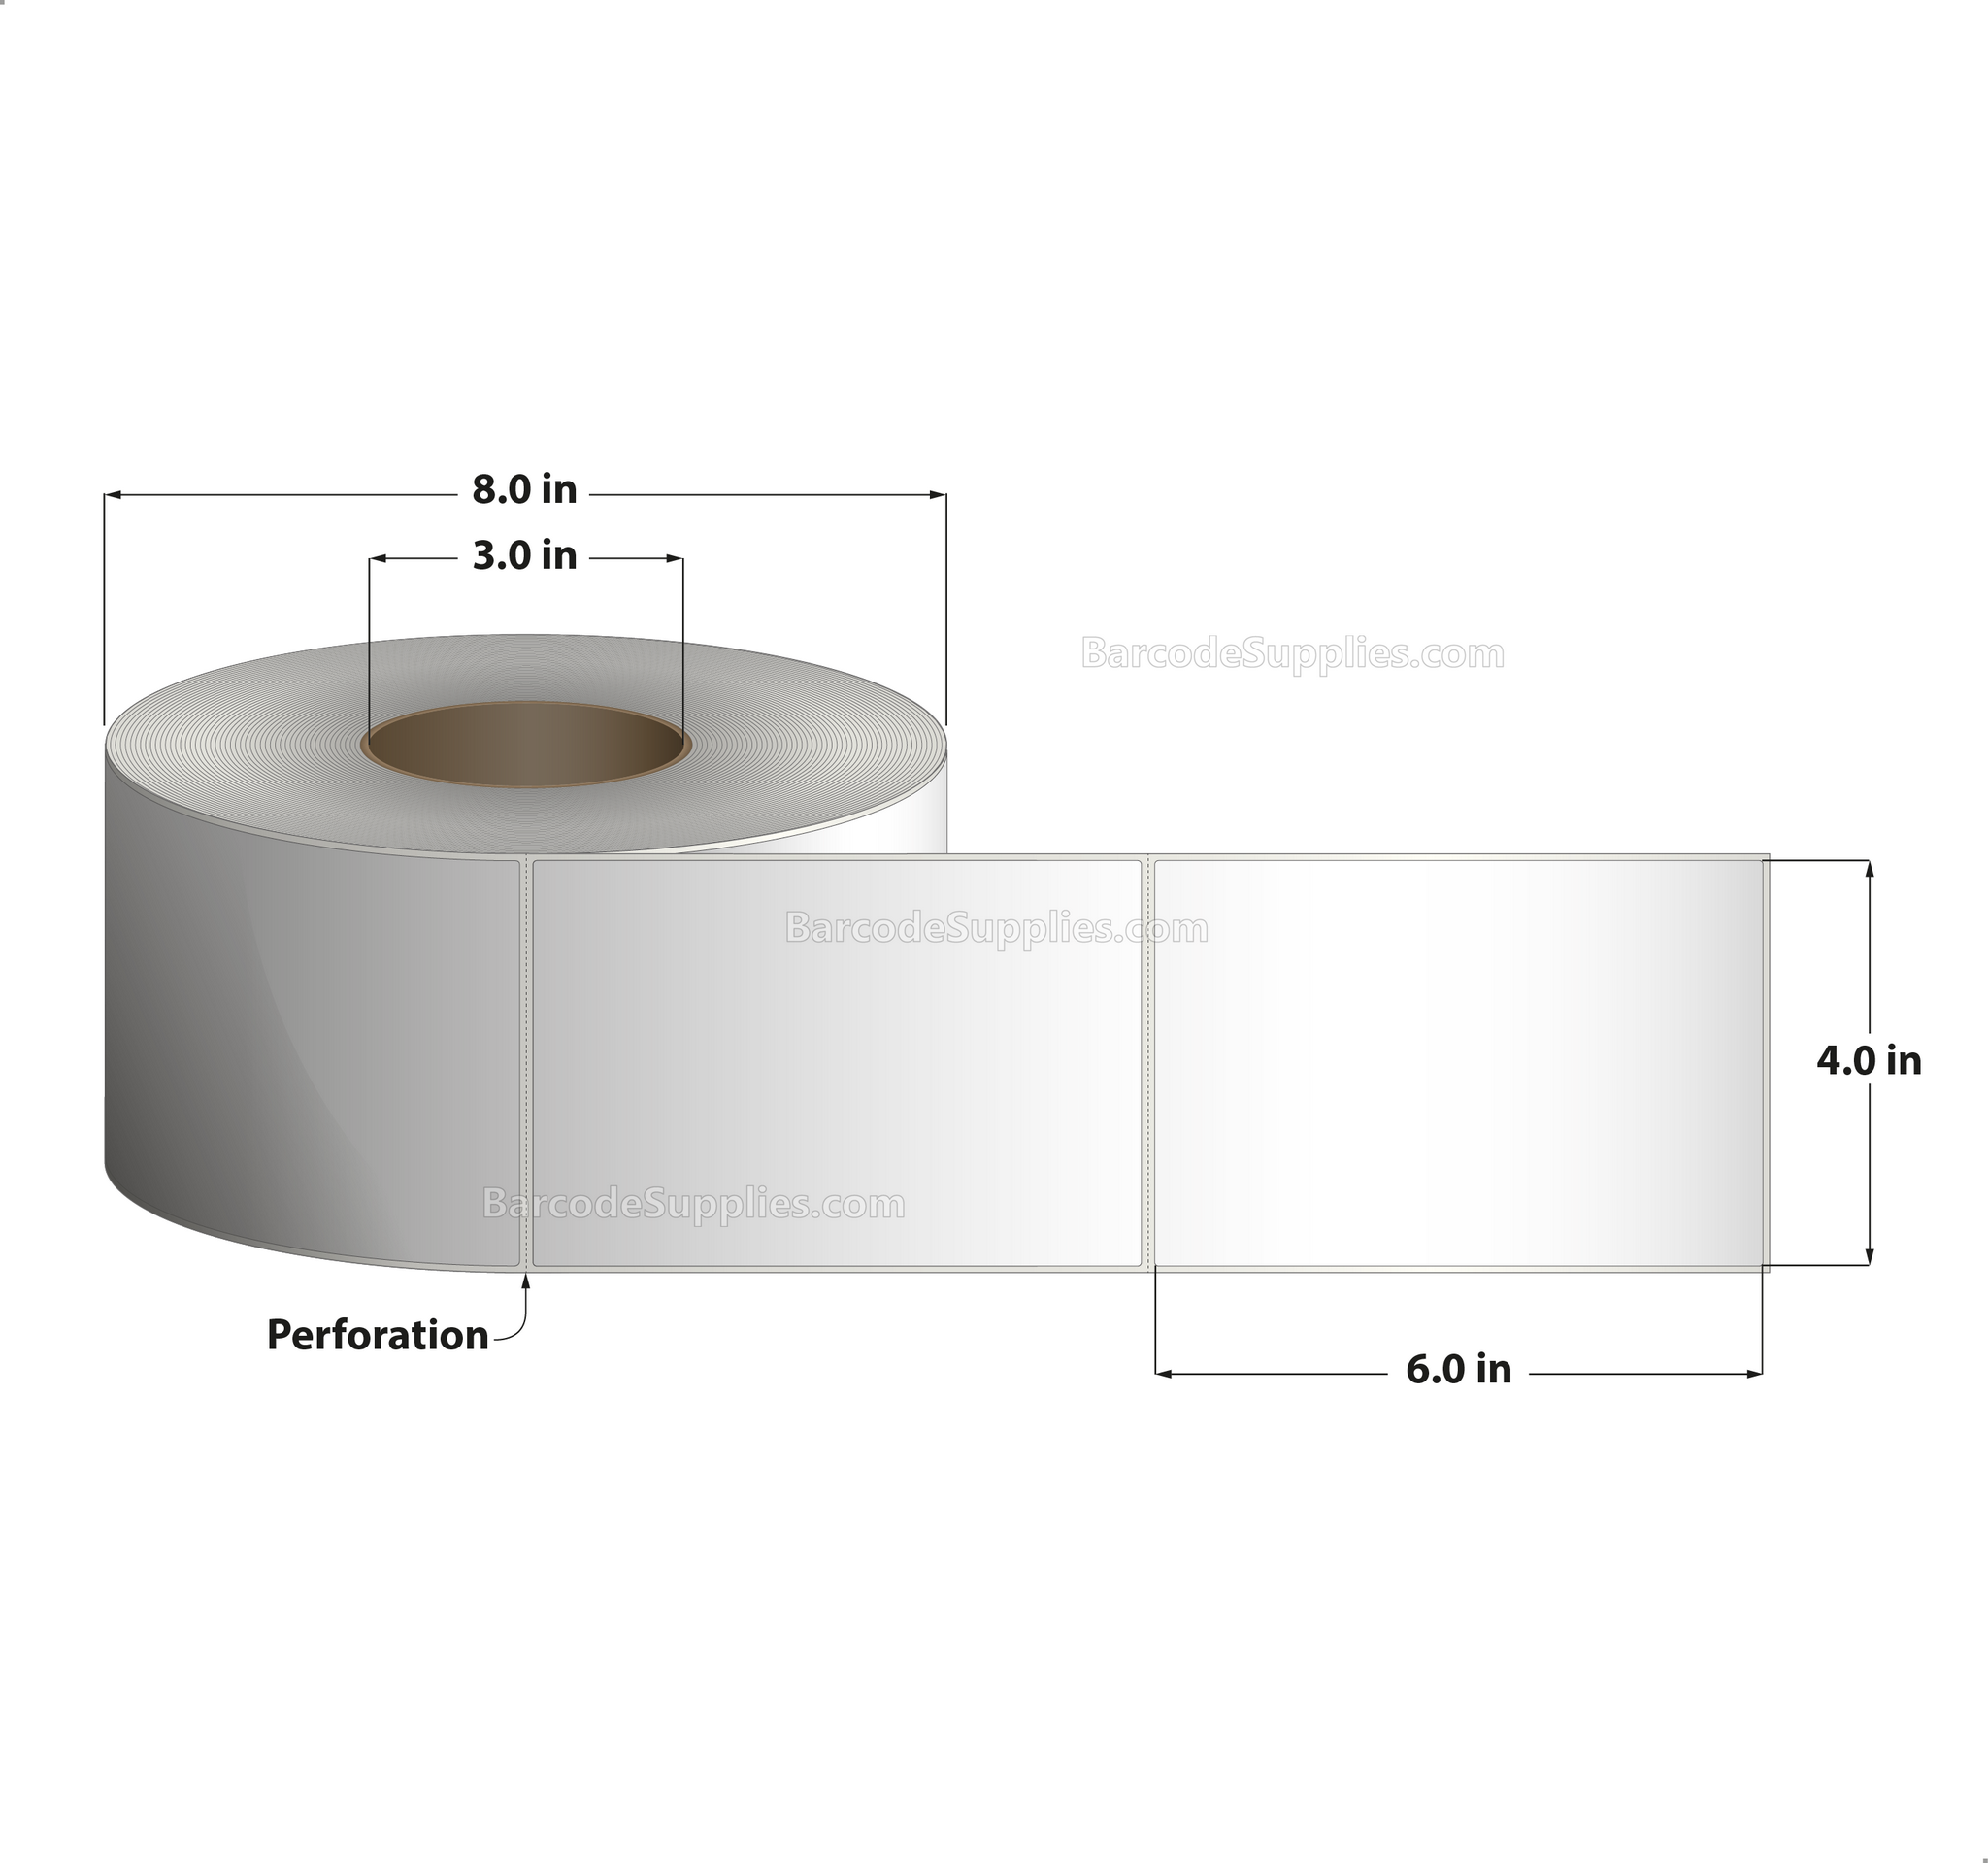 4 x 6 Direct Thermal White Labels With Permanent Acrylic Adhesive - Perforated - 1000 Labels Per Roll - Carton Of 4 Rolls - 4000 Labels Total - MPN: DT46-1P